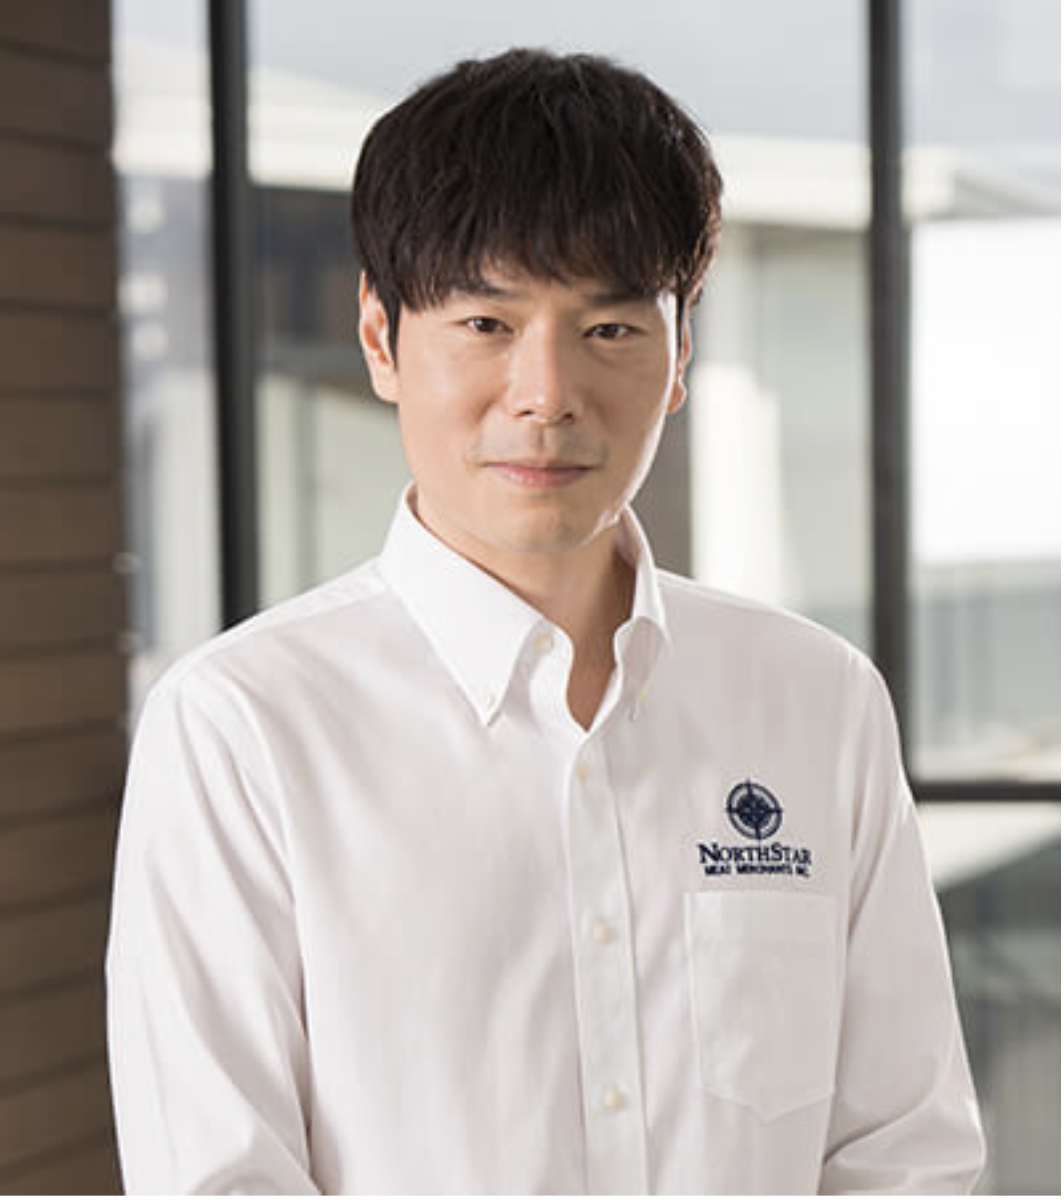 North Star founder, chair and CEO Anthony Ng